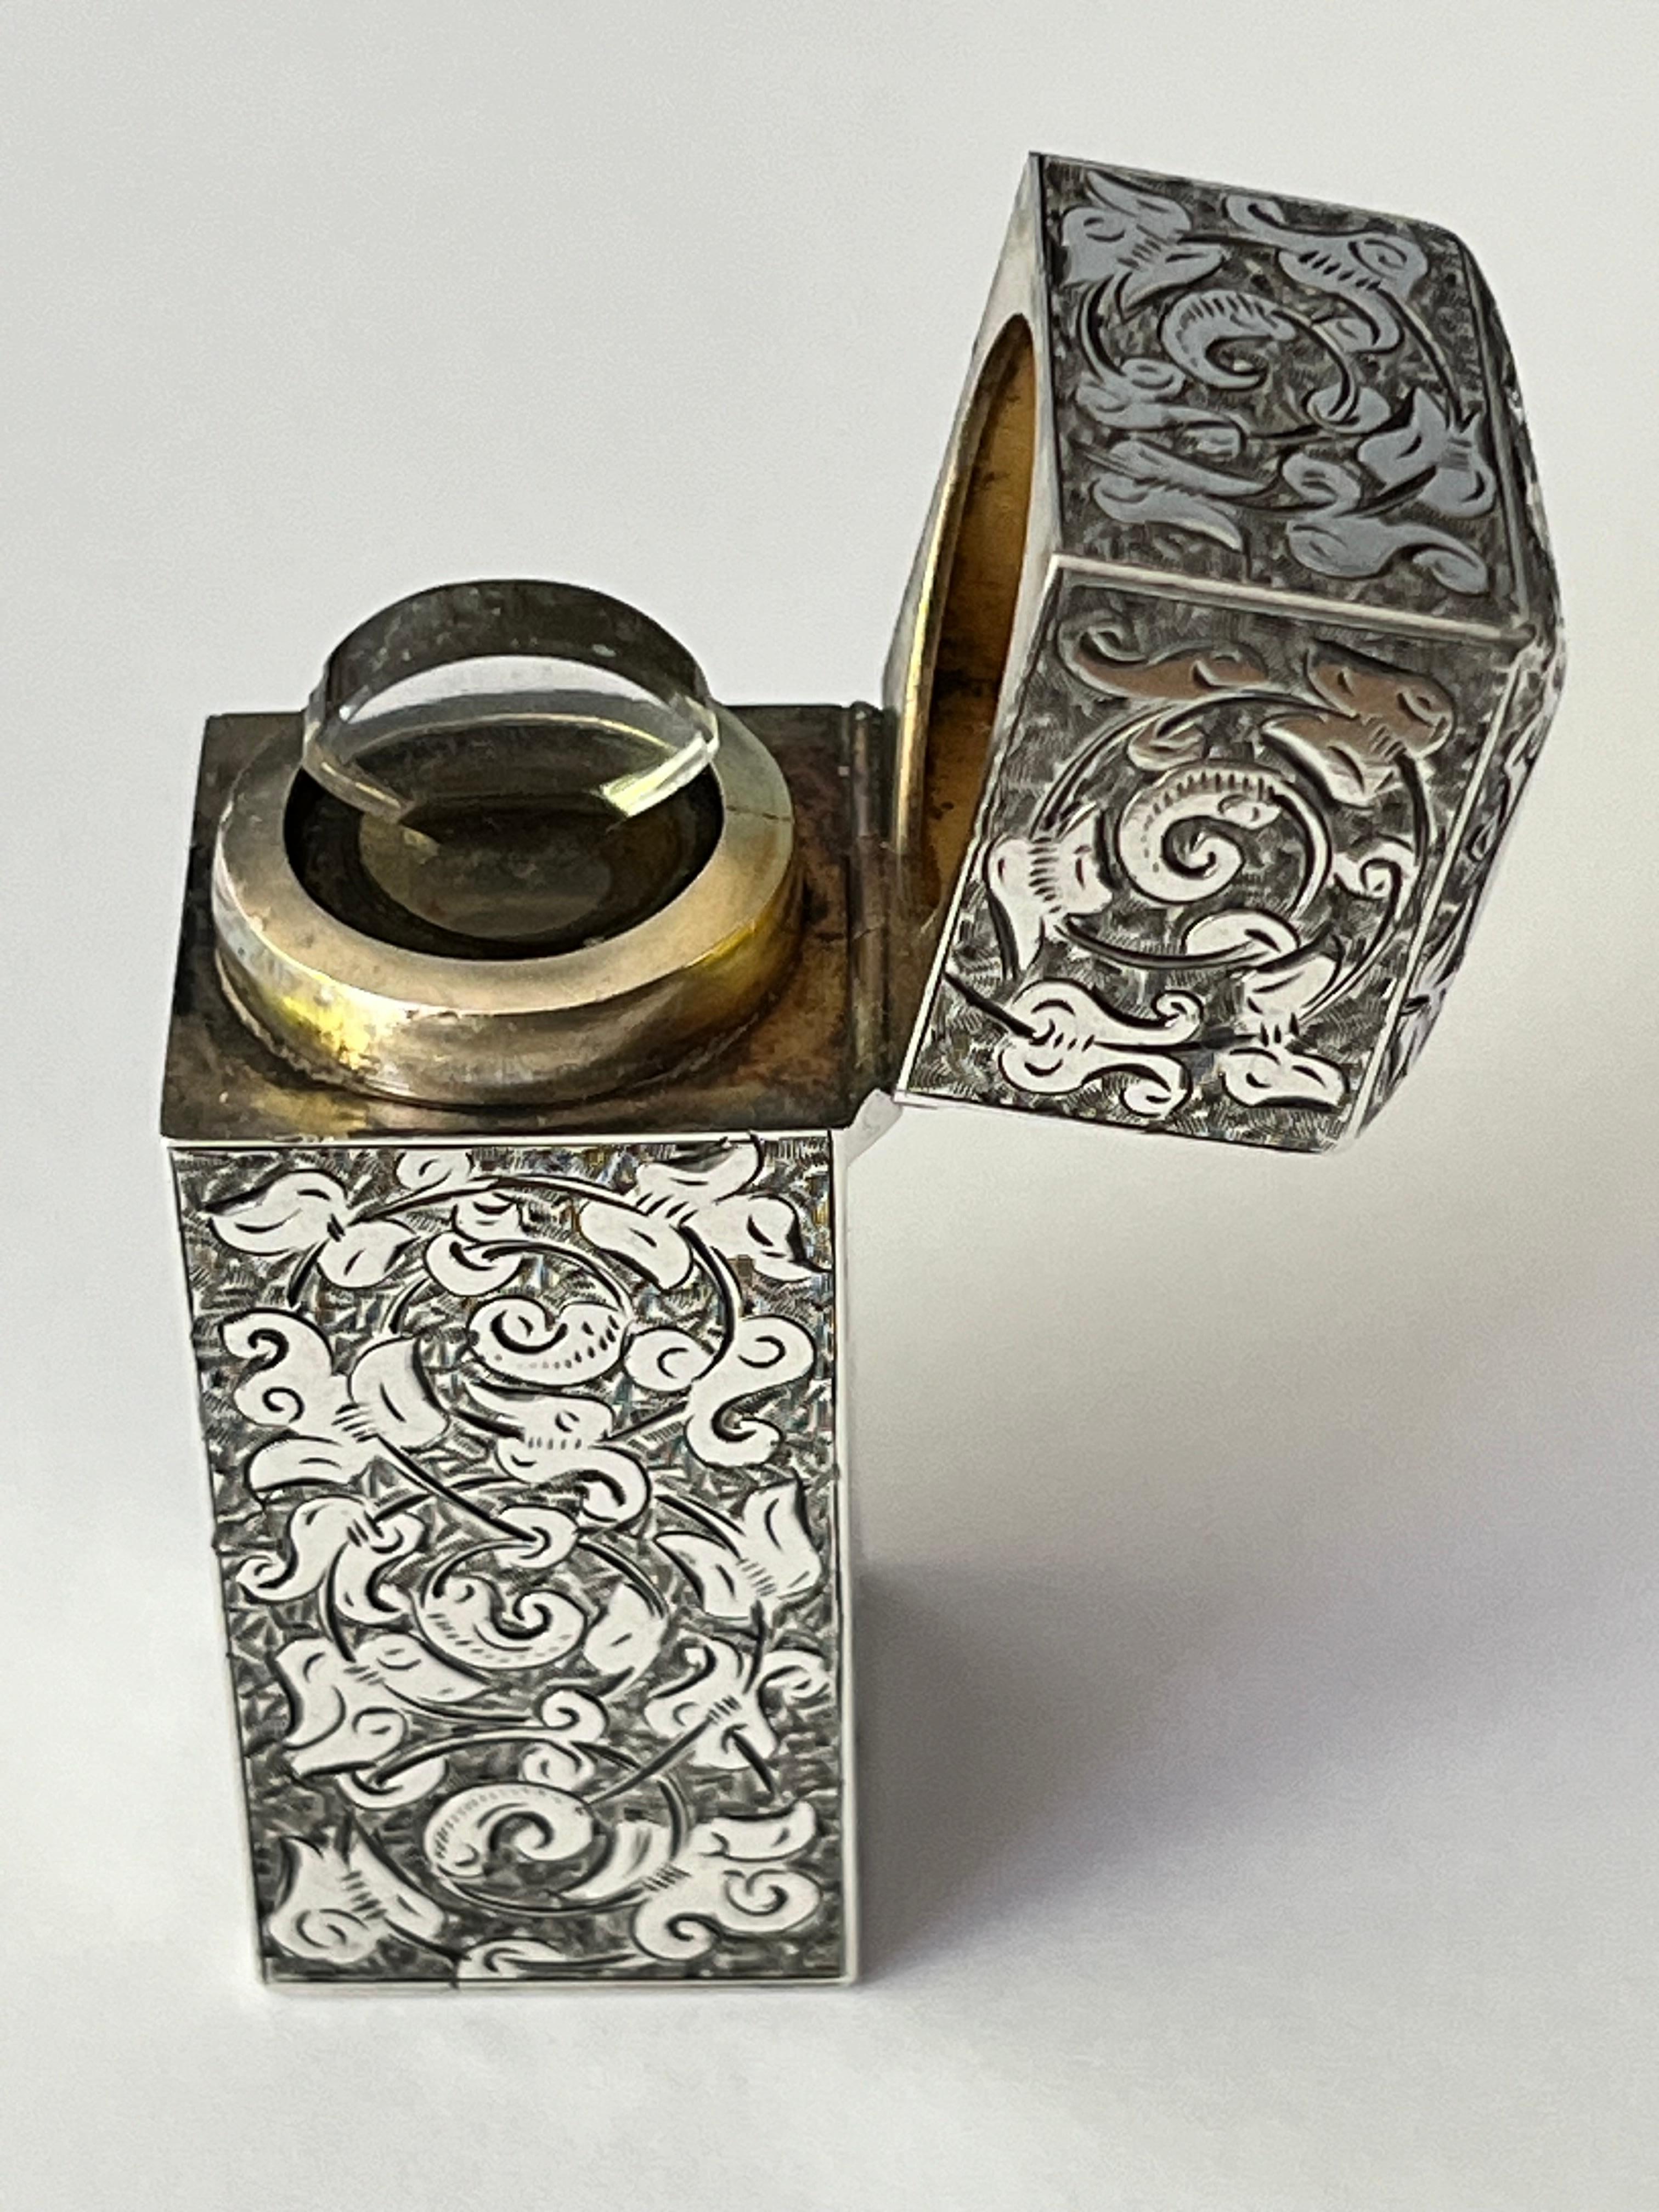 A fine quality and exceptional Victorian sterling silver scent or perfume bottle flask, of rectangular form, the hinged cover with domed paneled top, the exterior with all-over engraved and chased decoration depicting concentric circles of foliate